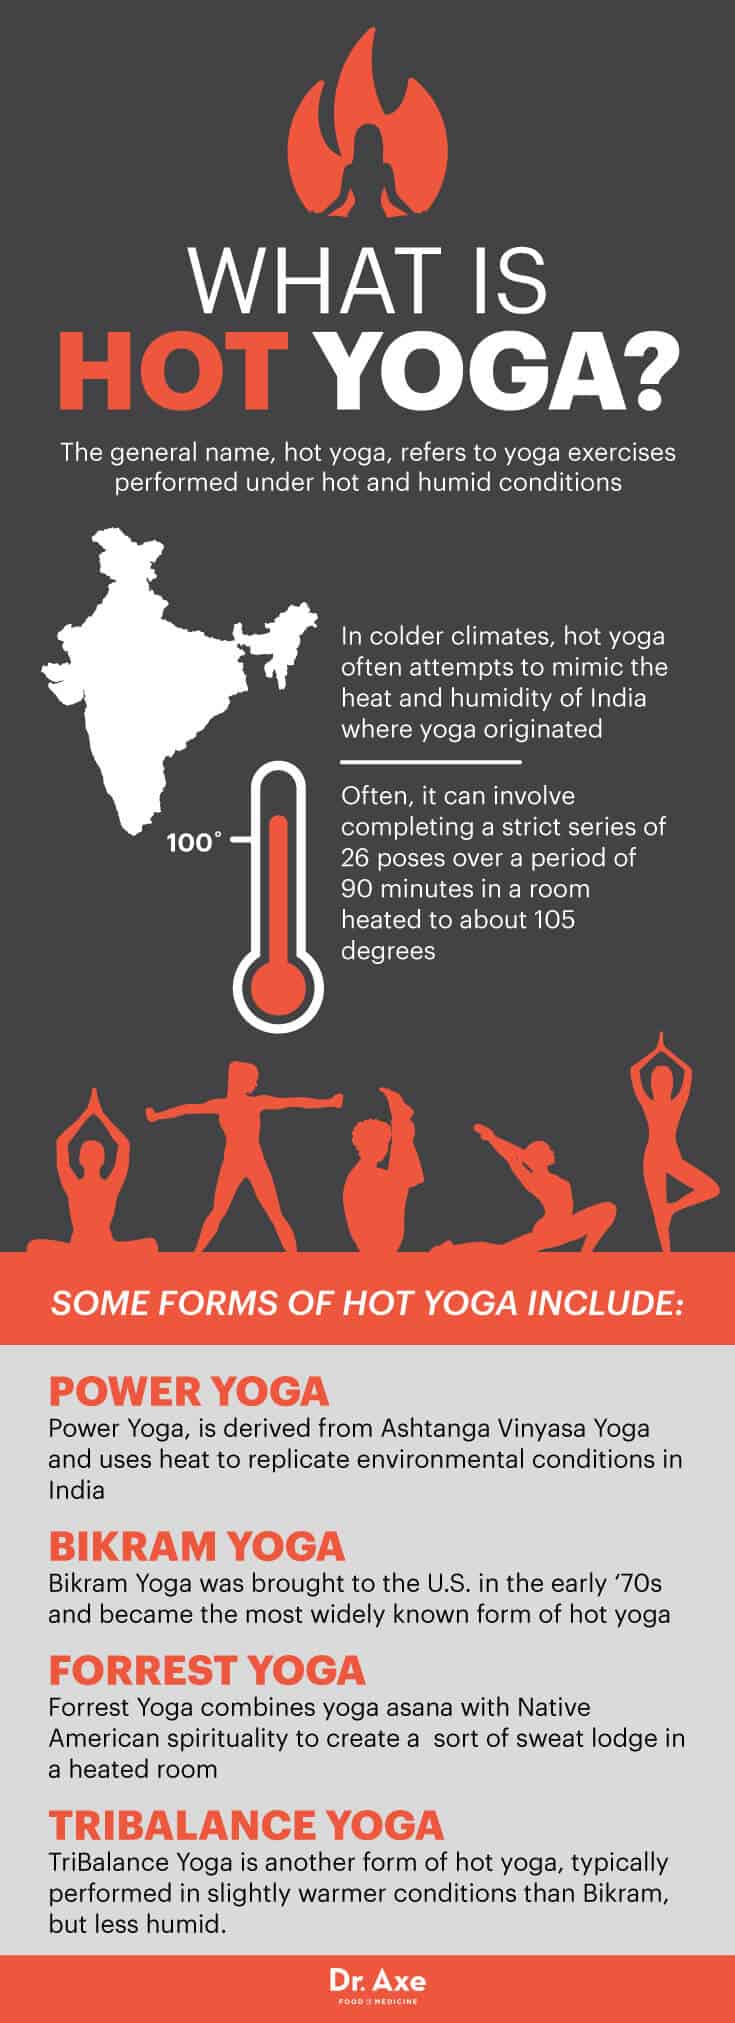 What is hot yoga? - Dr. Axe